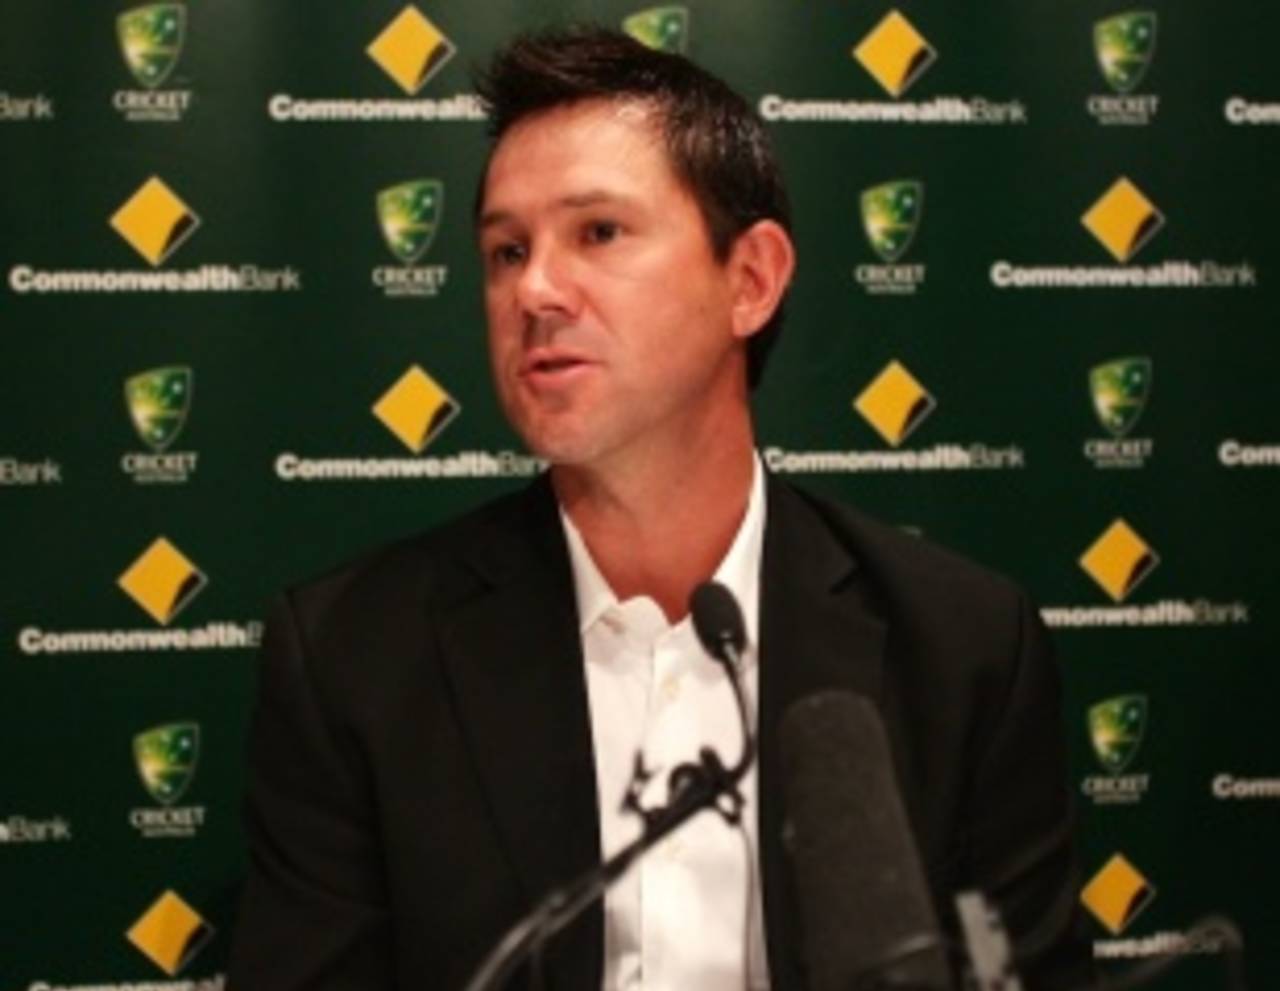 Ricky Ponting at a press conference a day after he was dropped from Australia's ODI team, SCG, Sydney, February 21, 2012